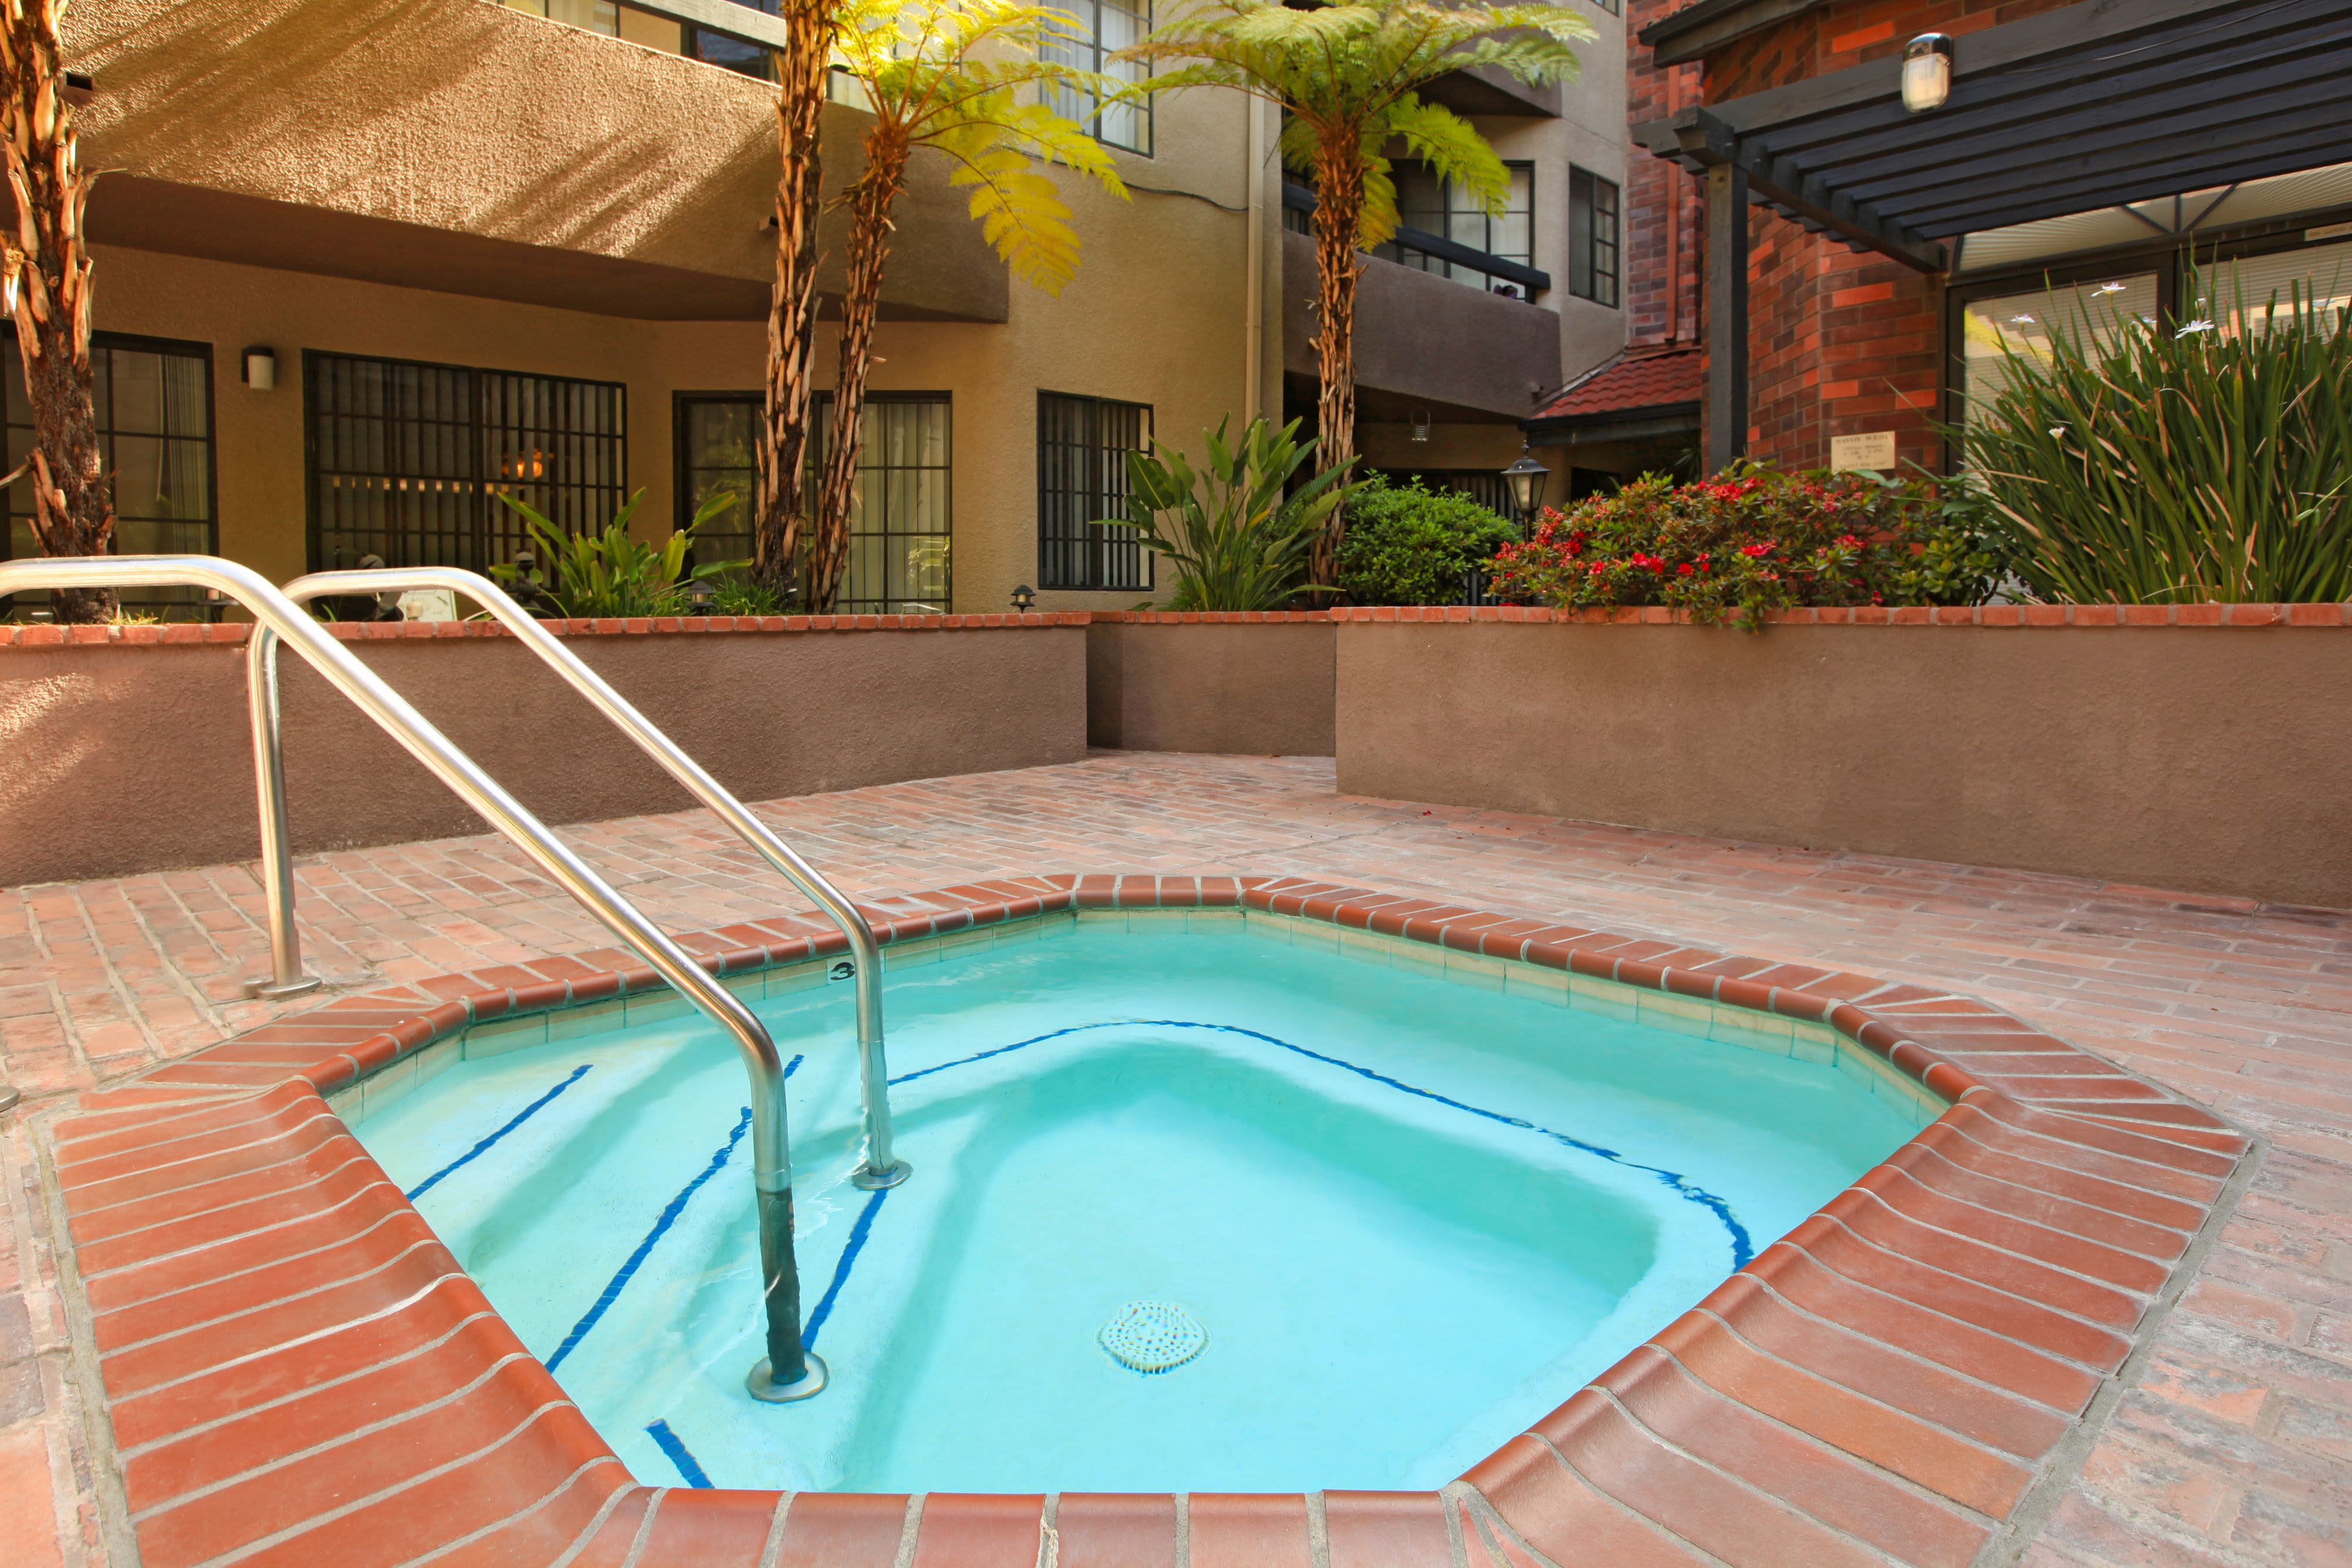 Spa at Savoy West Apartments in Los Angeles, California